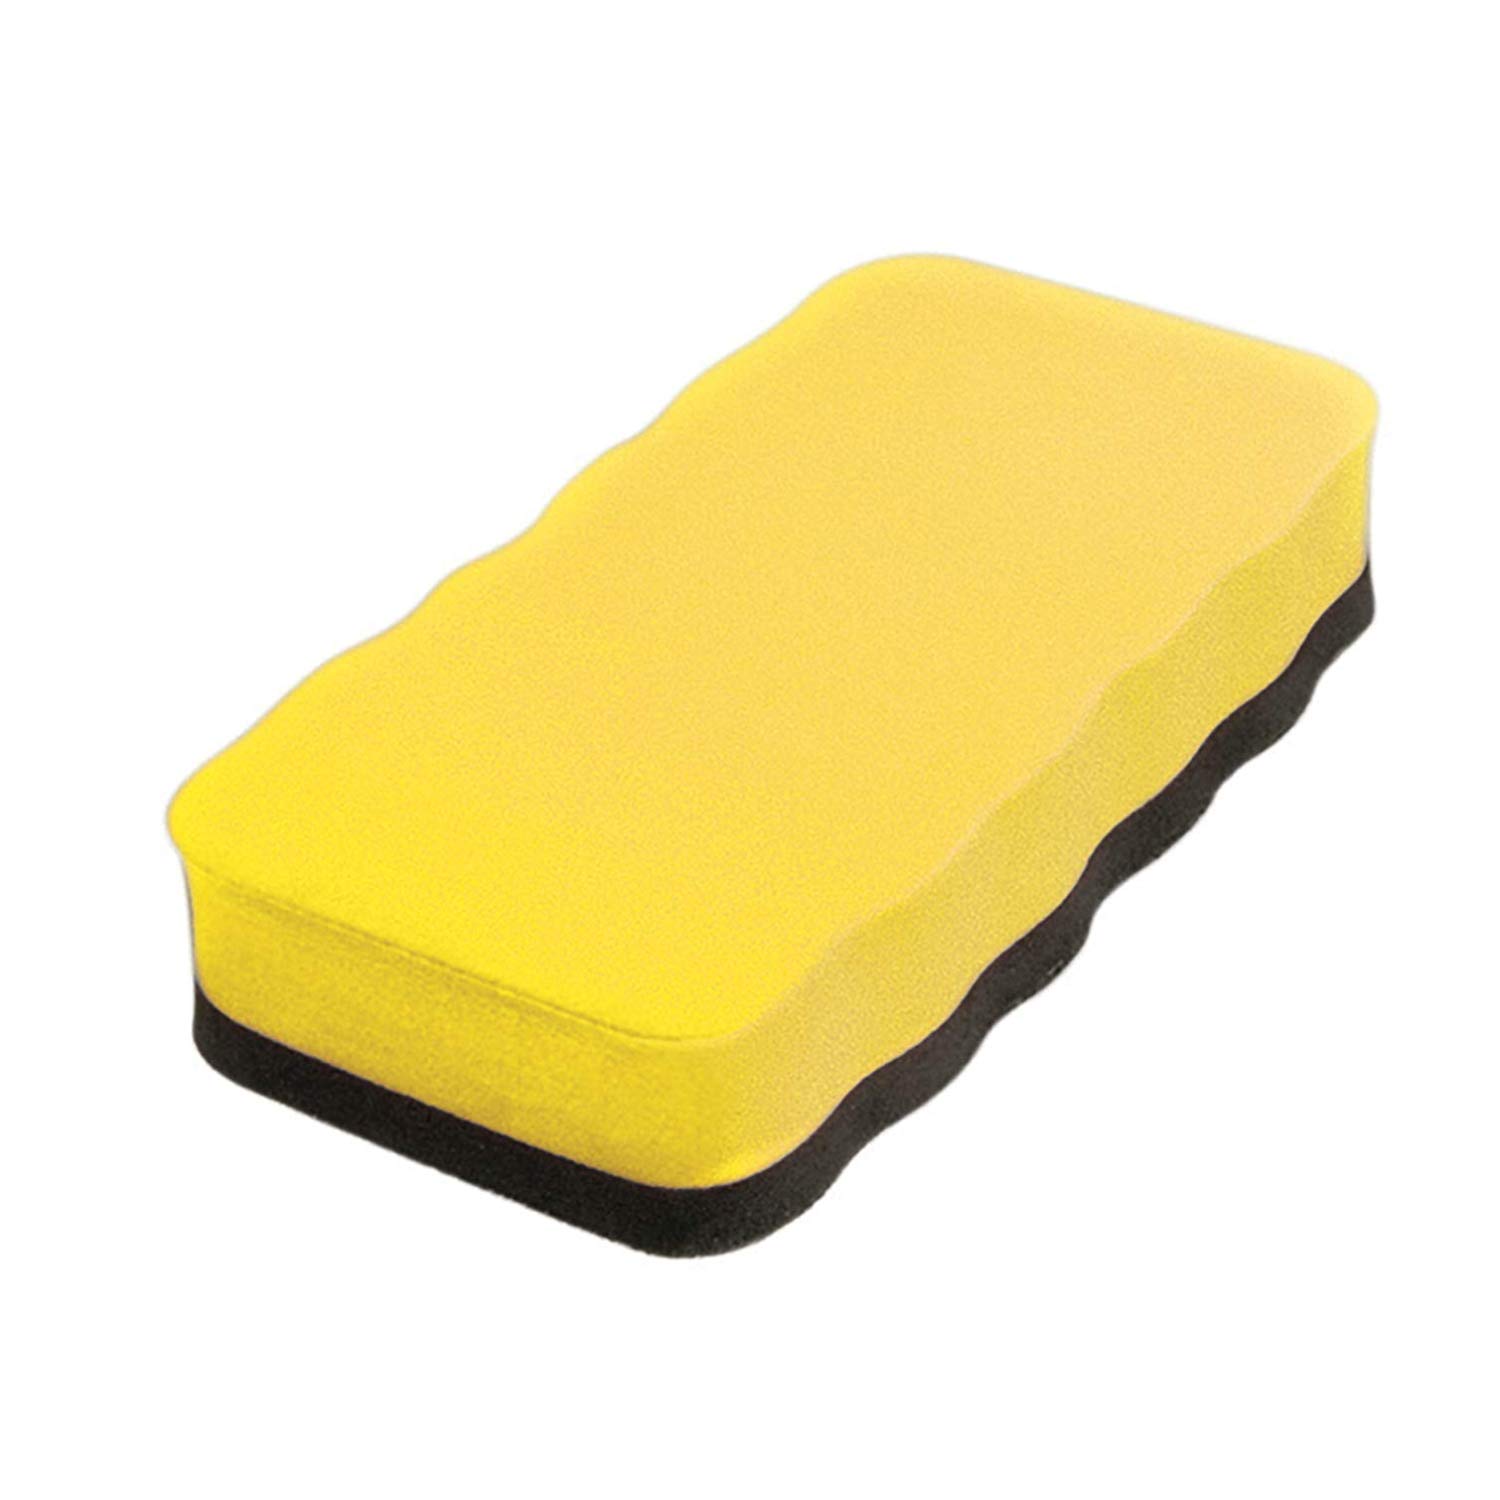 Dowling Magnets Magnetic Whiteboard Eraser: Solid Rectangle - Save Out of  the Box - Save Out of the Box